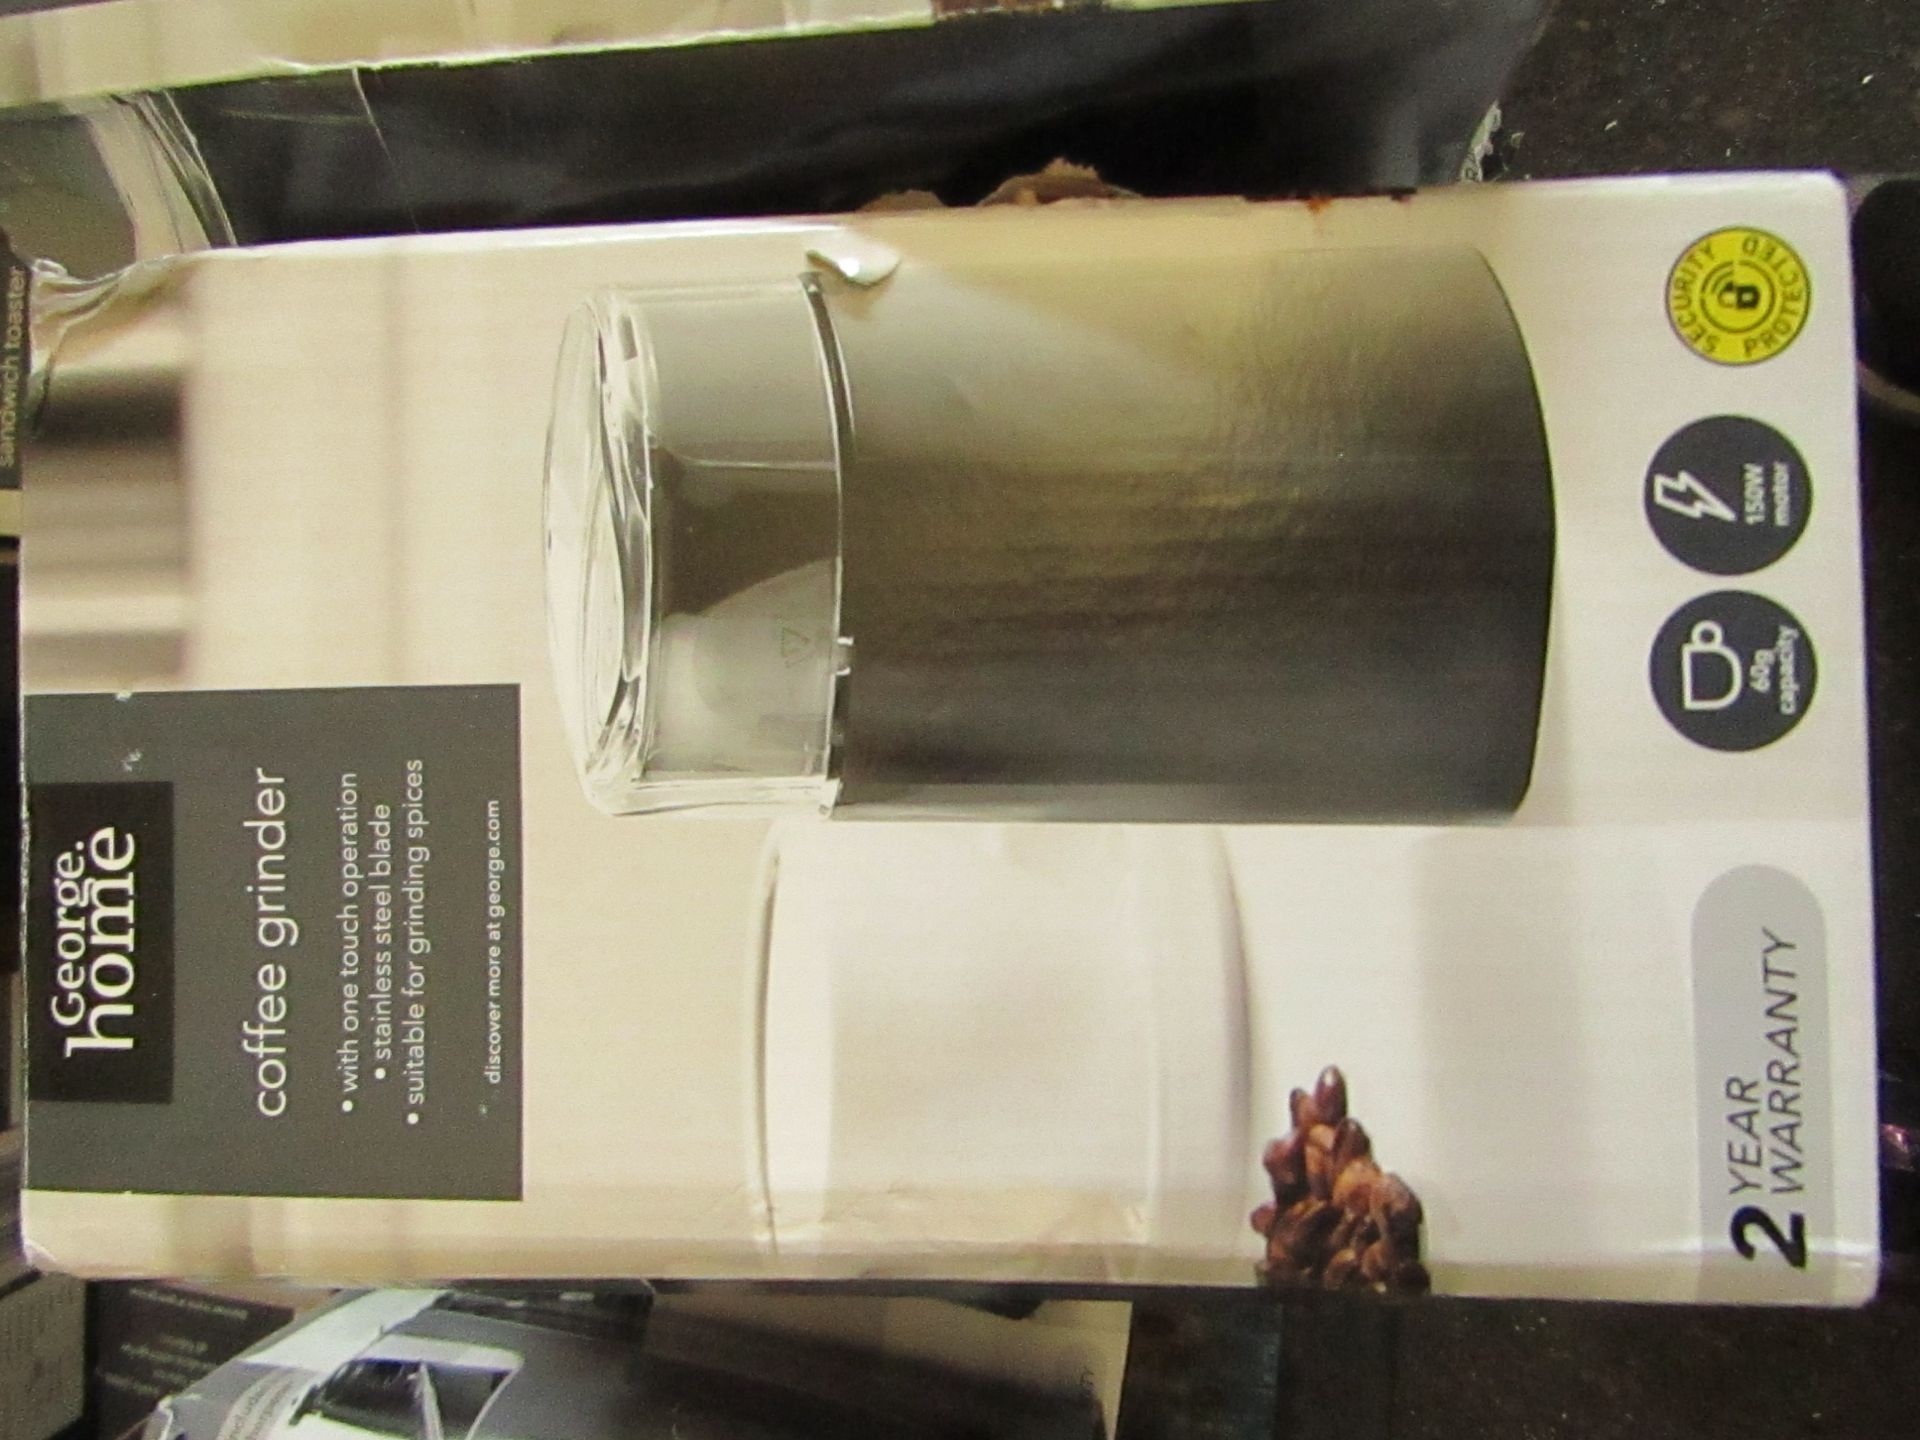 | 3X | 150W 60G STAINLESS STEEL COFFEE GRINDER | UNCHECKED & BOXED | NO ONLINE RESALE | RRP £10 |